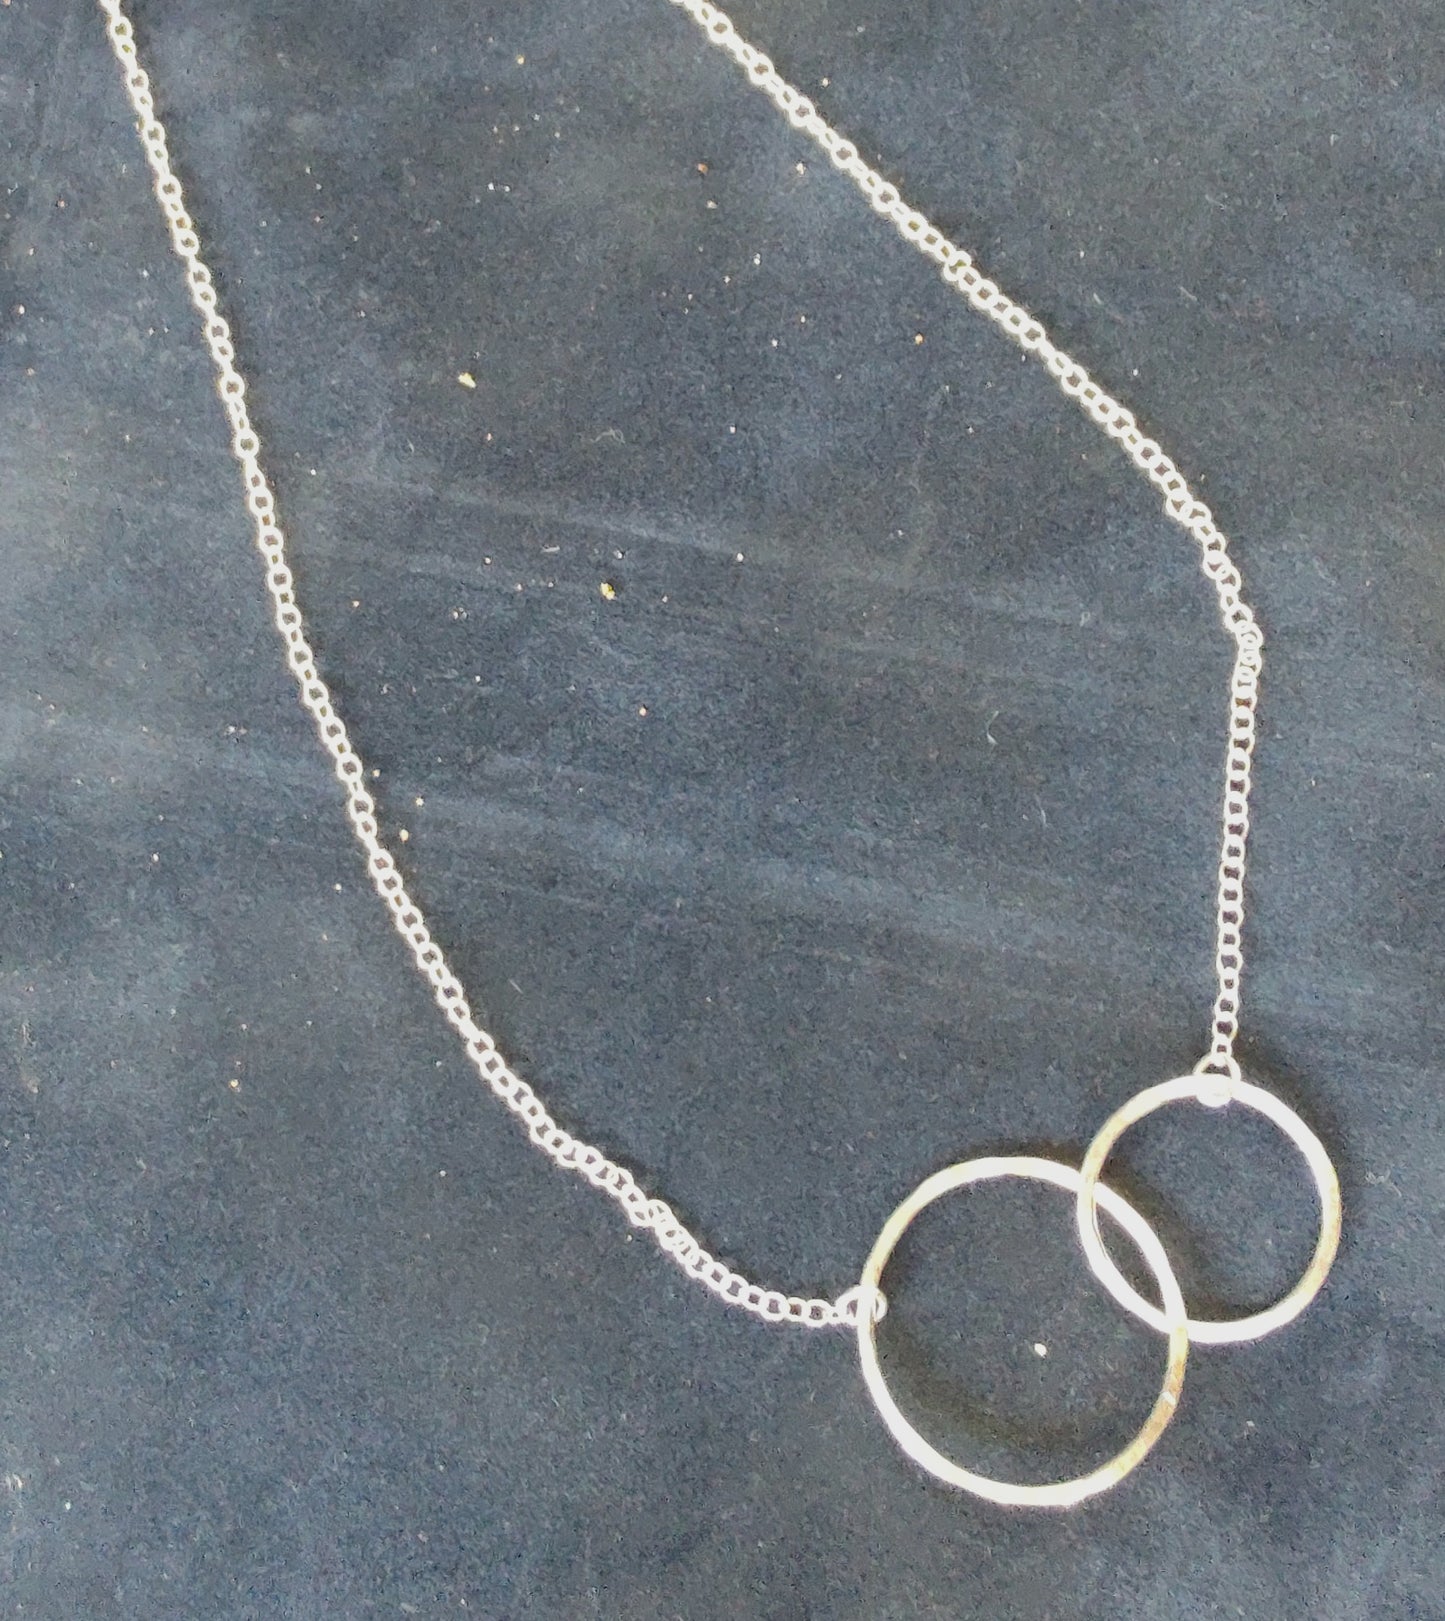 Zoe Ruth- Silver and Open Two Ring Necklace